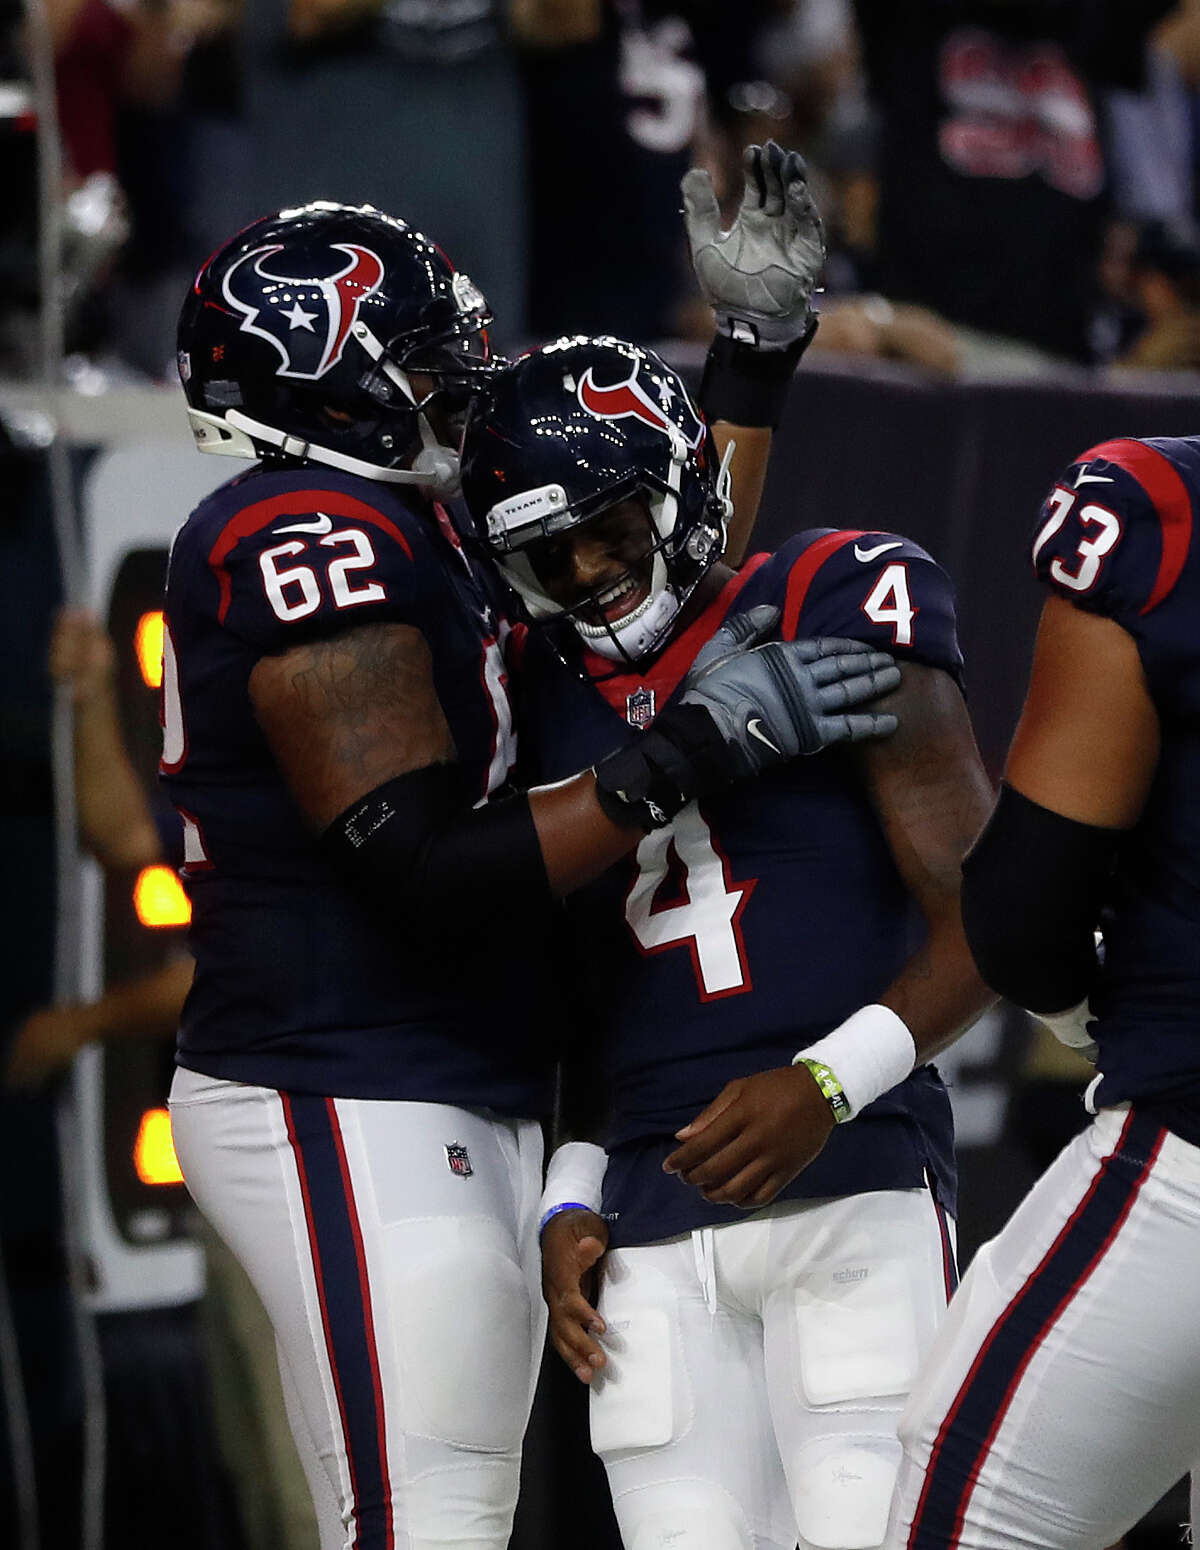 Houston Texans quarterback Deshaun Watson (4) hugs offensive guard Chad Slade (62) after Watson jumped into the end zone for a touchdown during the third quarter of an NFL preseason game at NRG Stadium, Saturday, Aug. 19, 2017, in Houston. ( Karen Warren / Houston Chronicle )